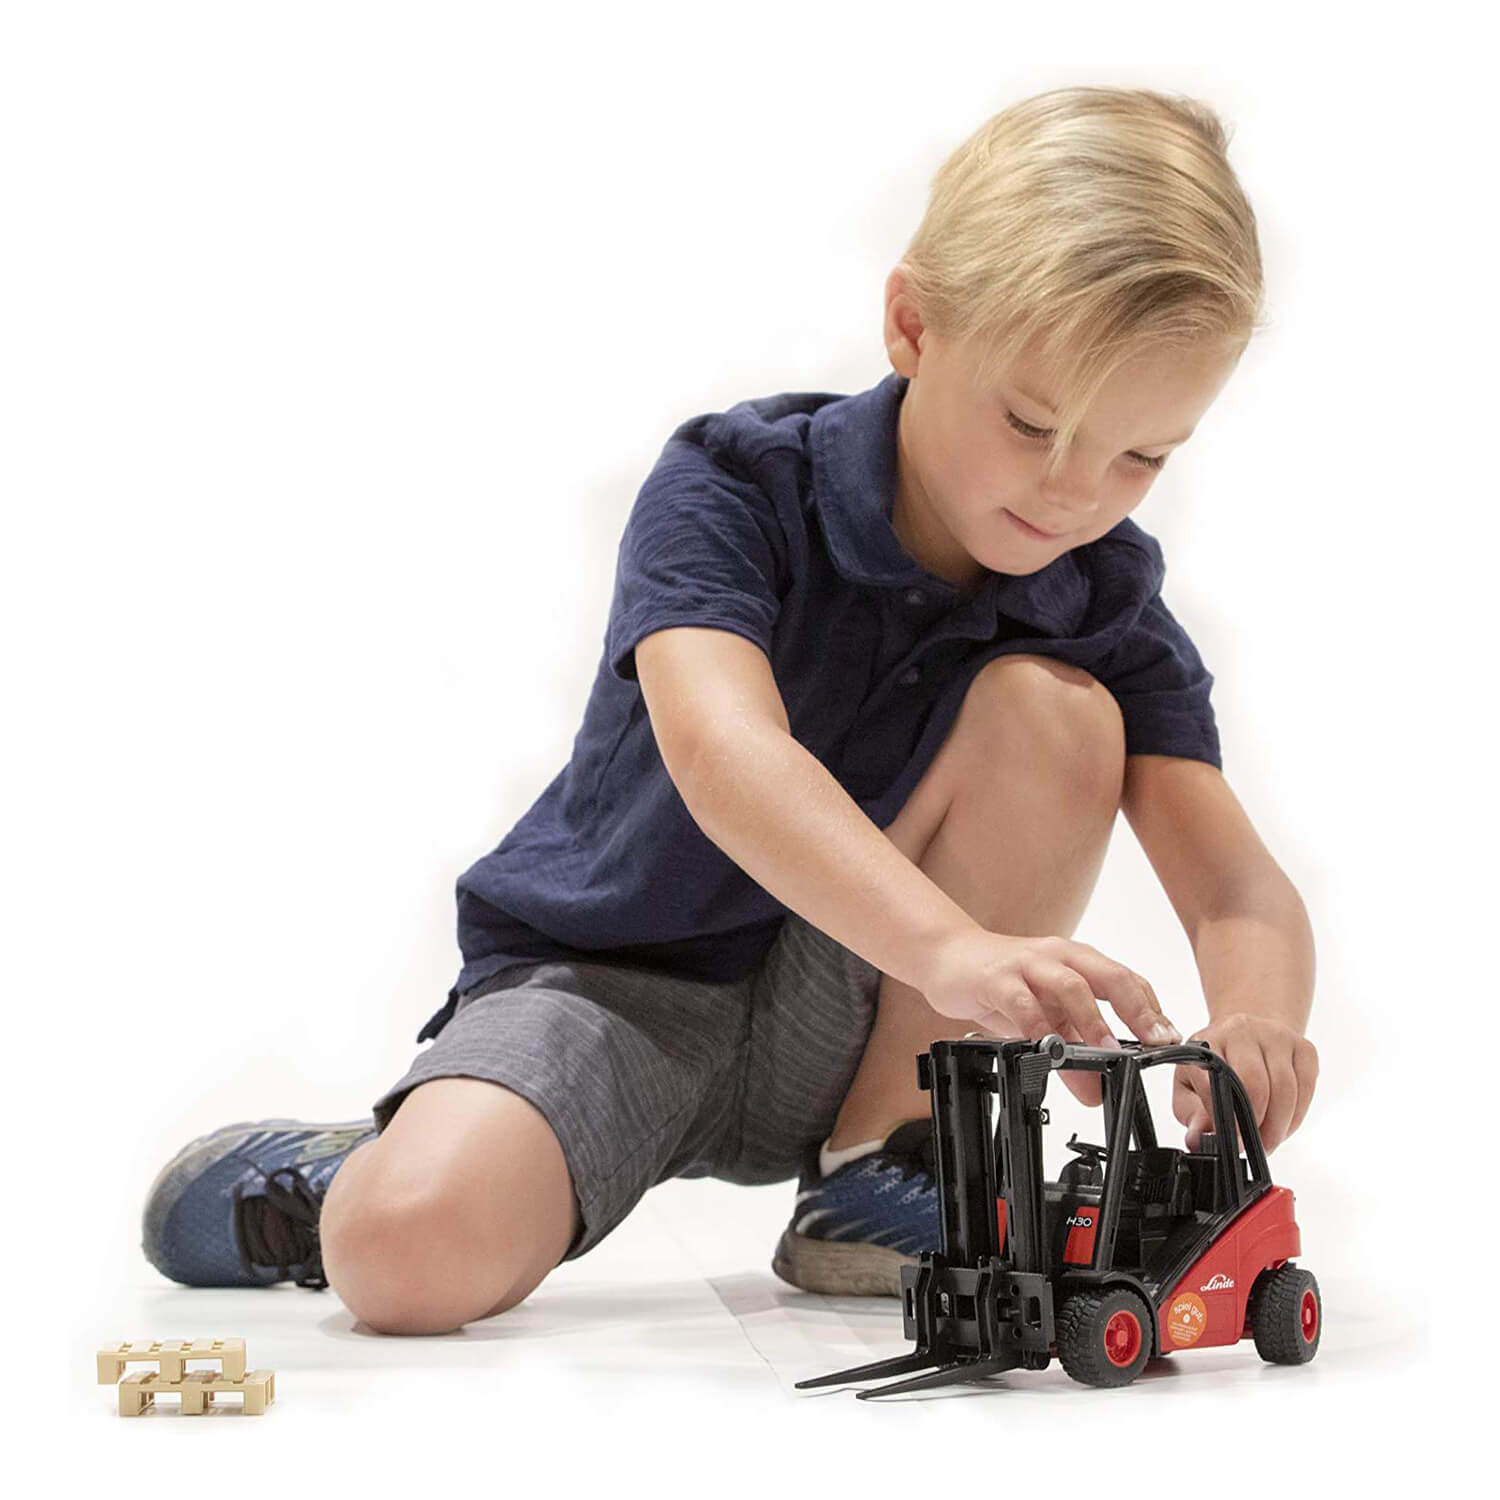 Kid playing with the forklift toy.